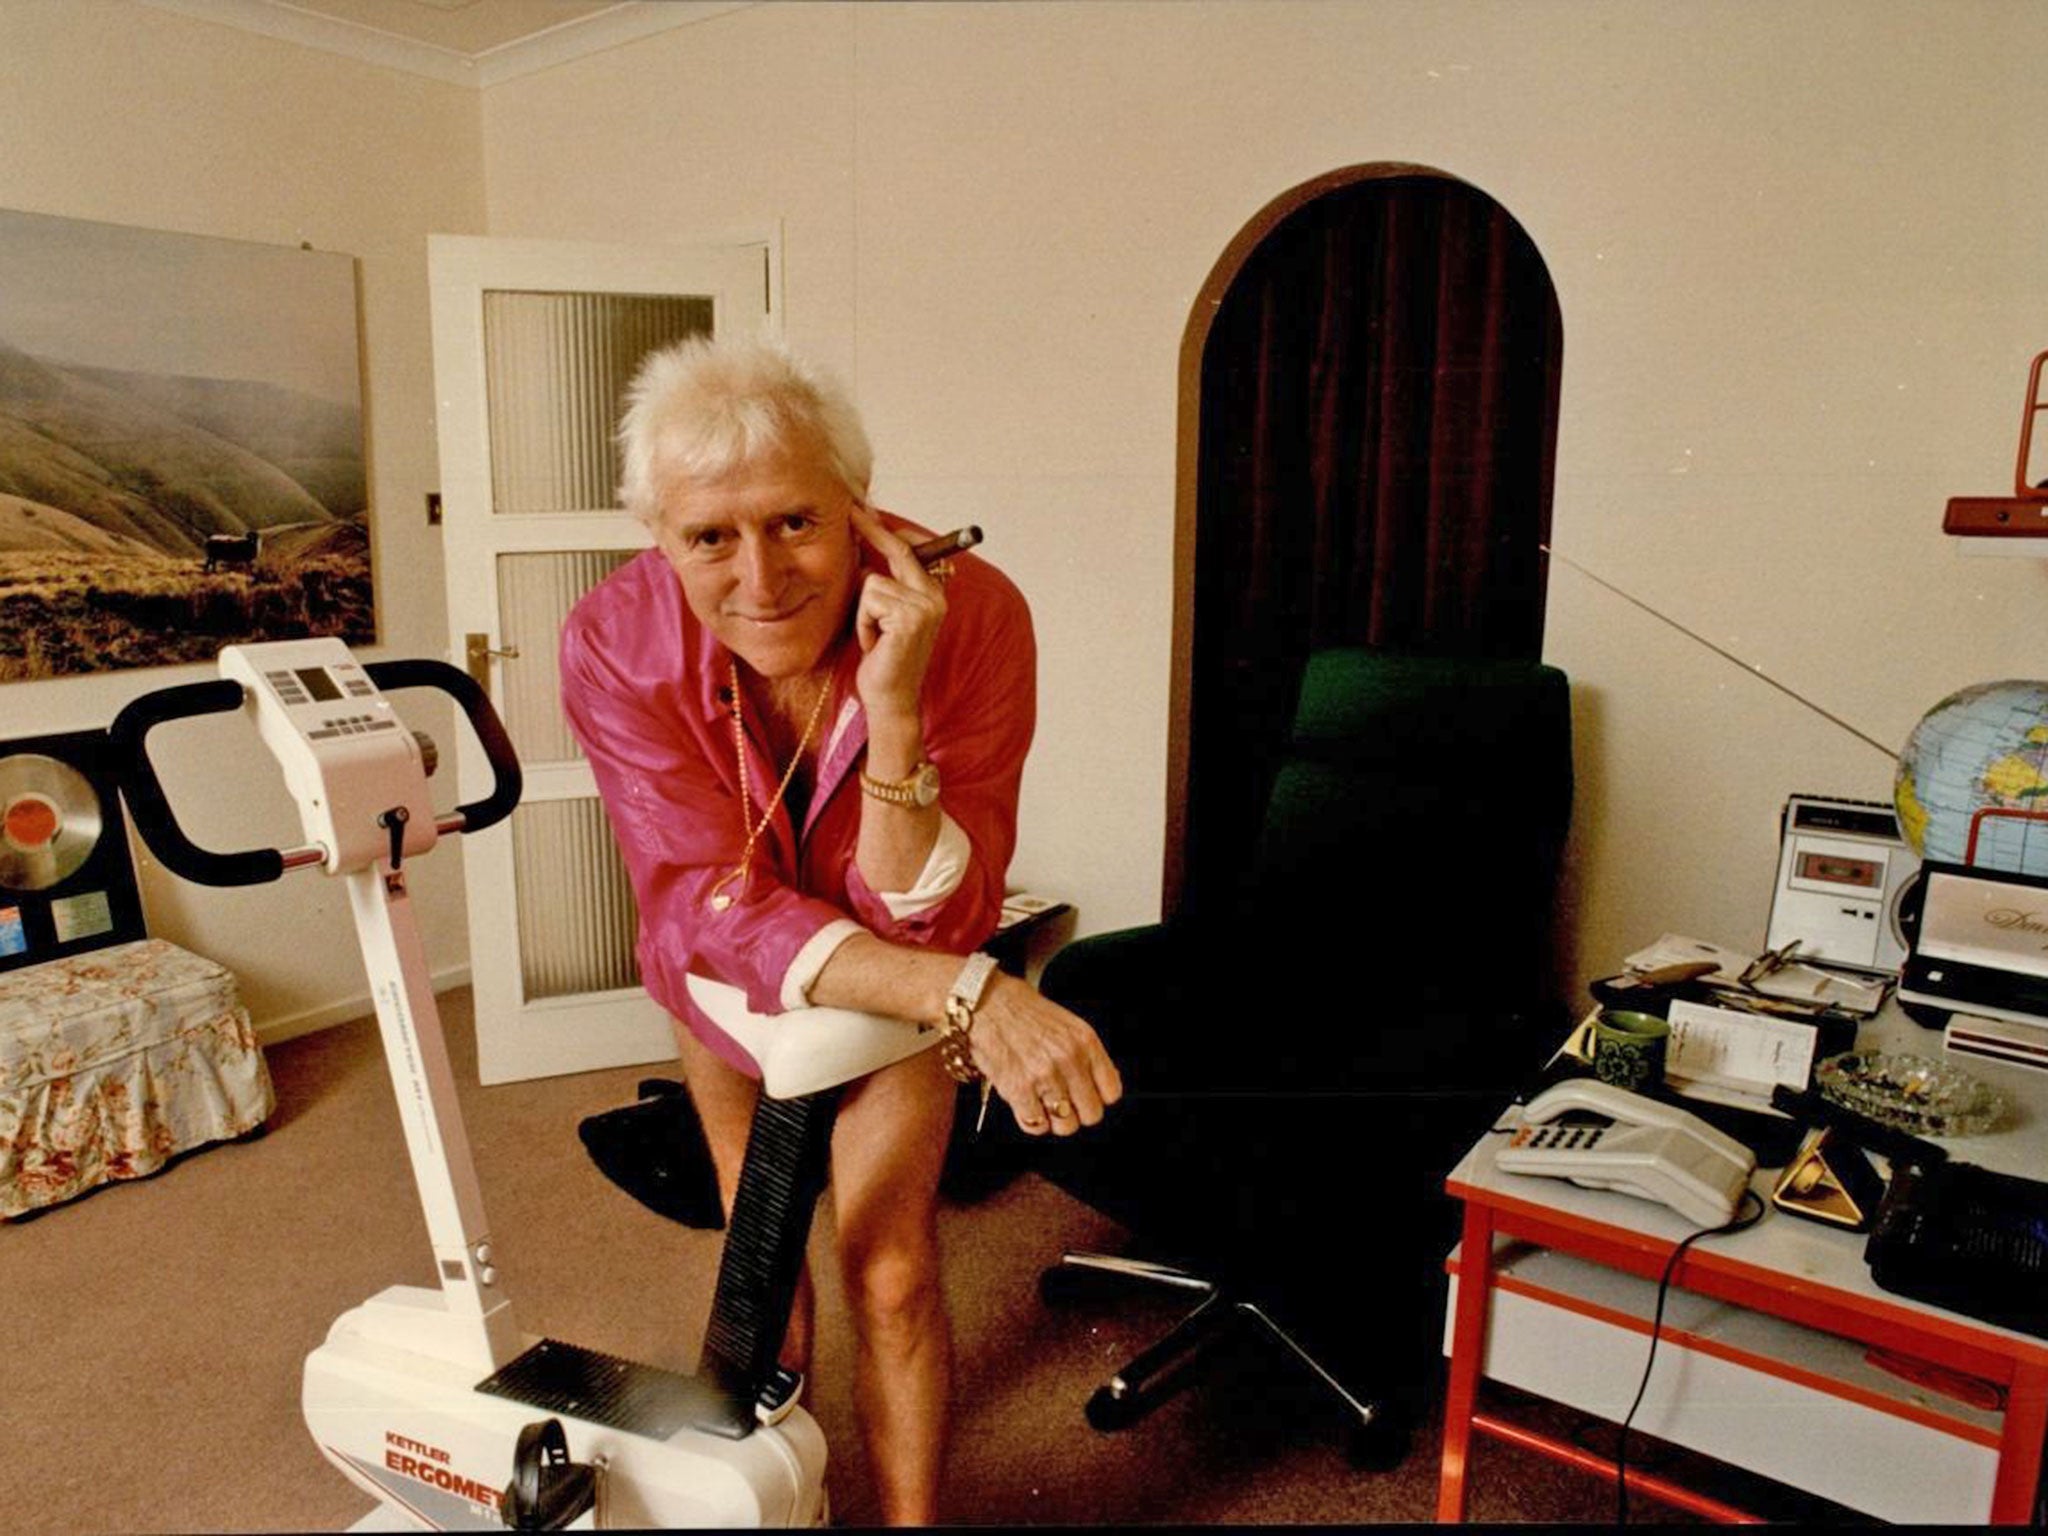 Savile revealed: for years, tabloid journalists had said that he must have a serious skeleton in his closet or he he’d have been knighted sooner